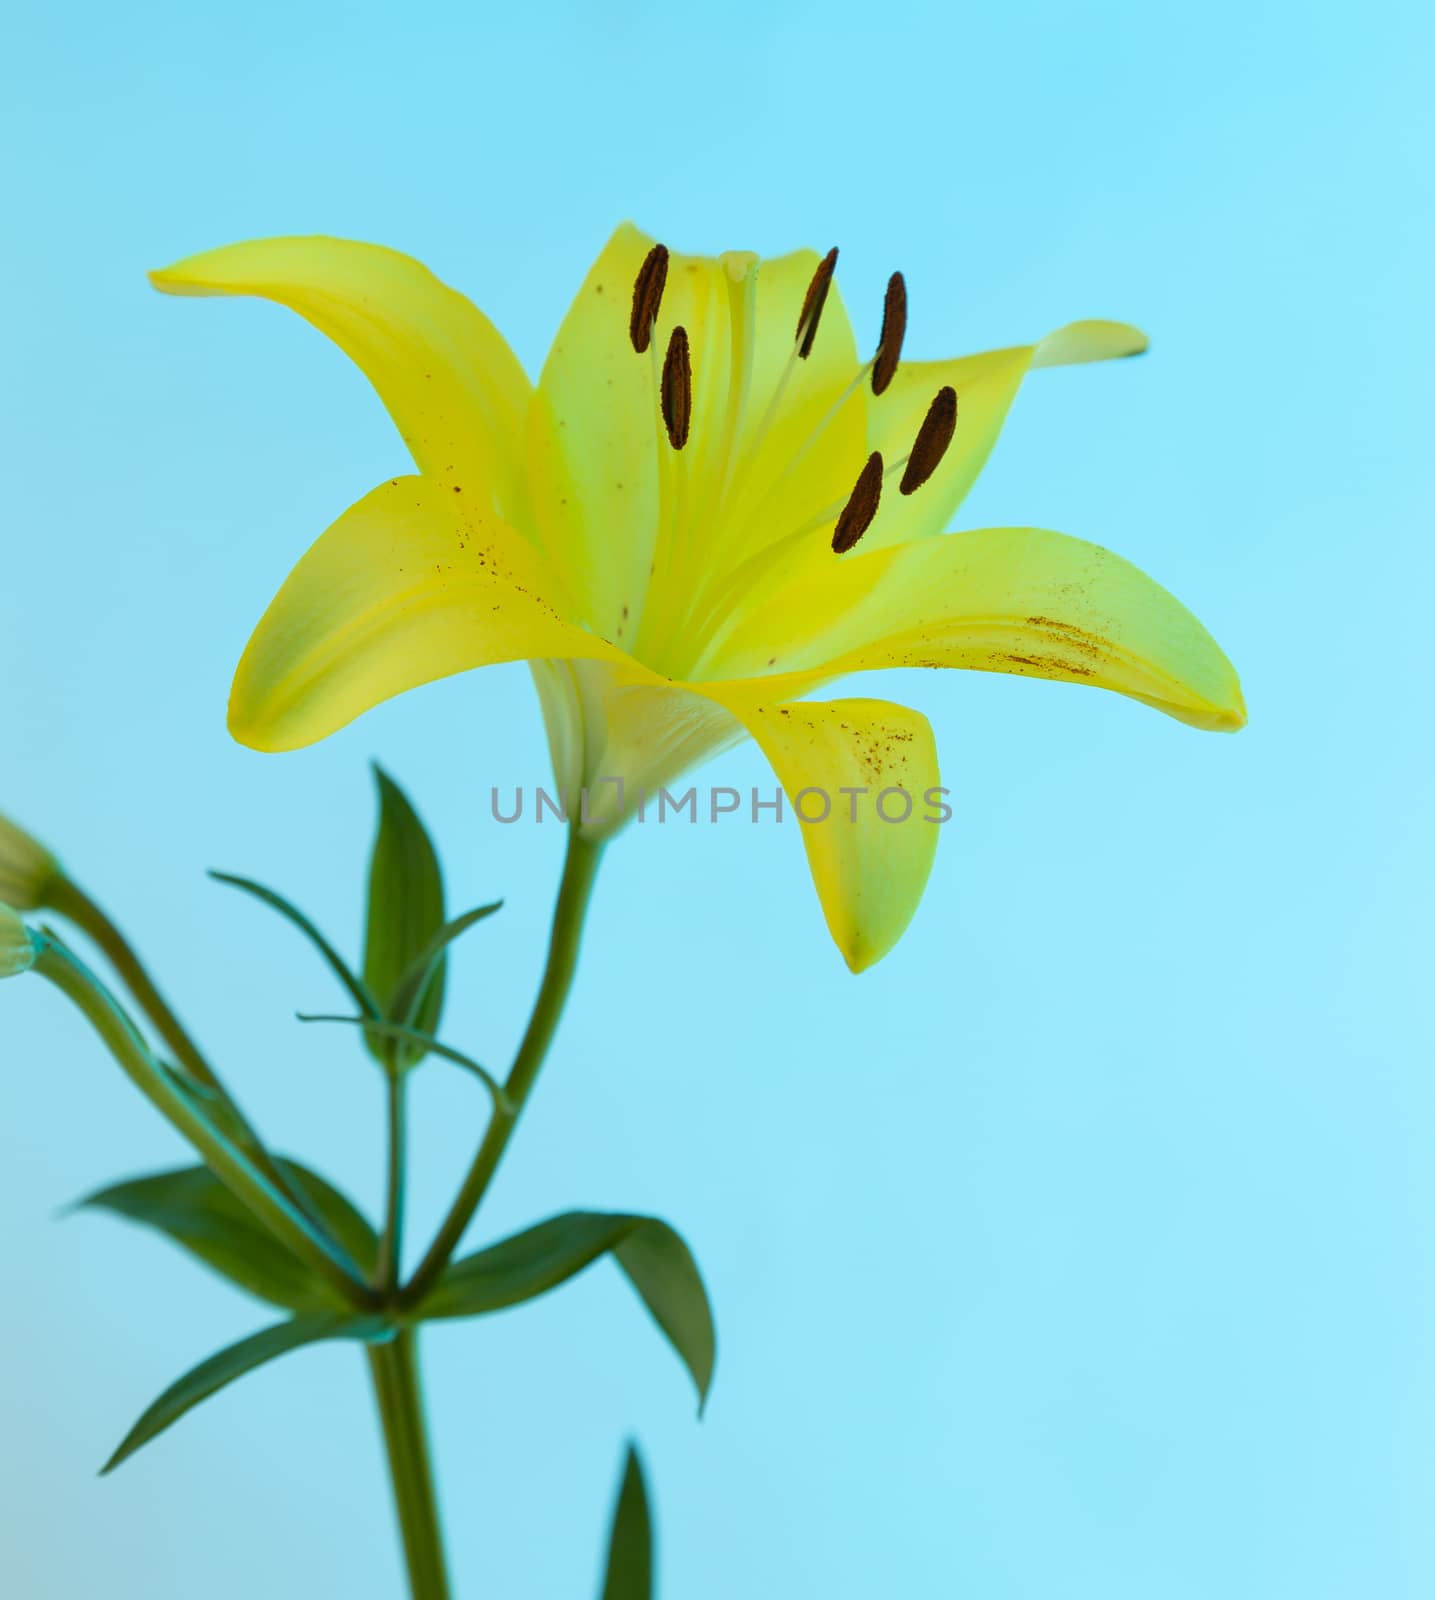 A yellow Asiatic Lily Lillium flower with green stem and leaves on a blue background by WittkePhotos